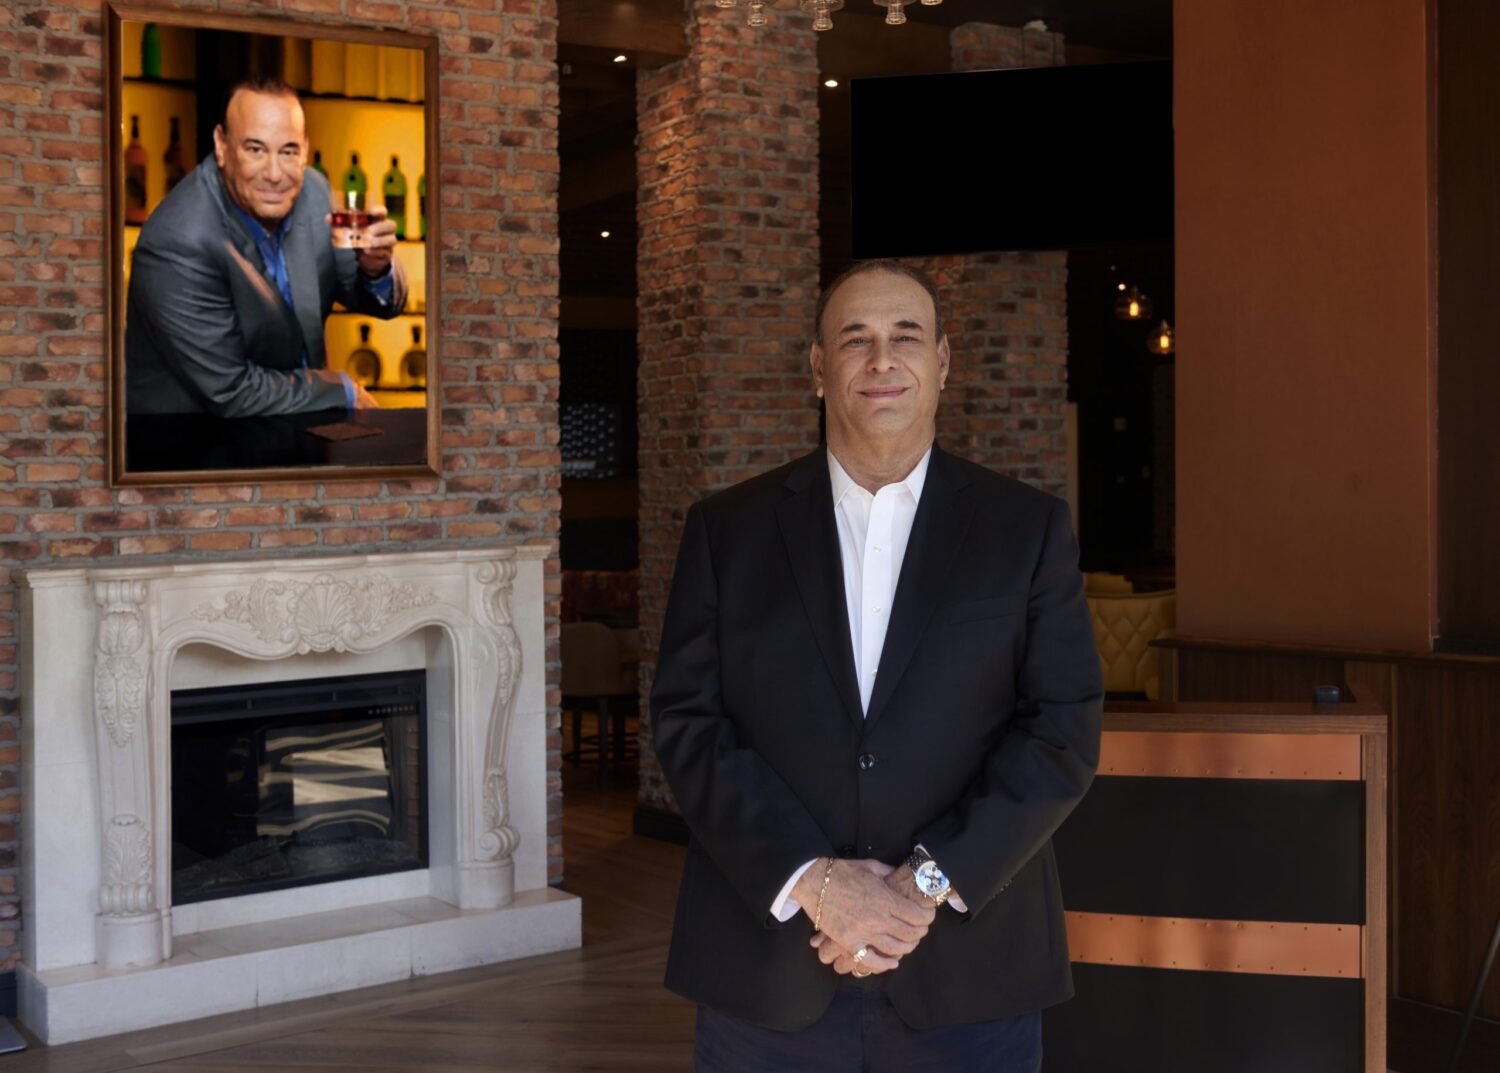 Jon Taffer posing in front of a brick wall and white fireplace